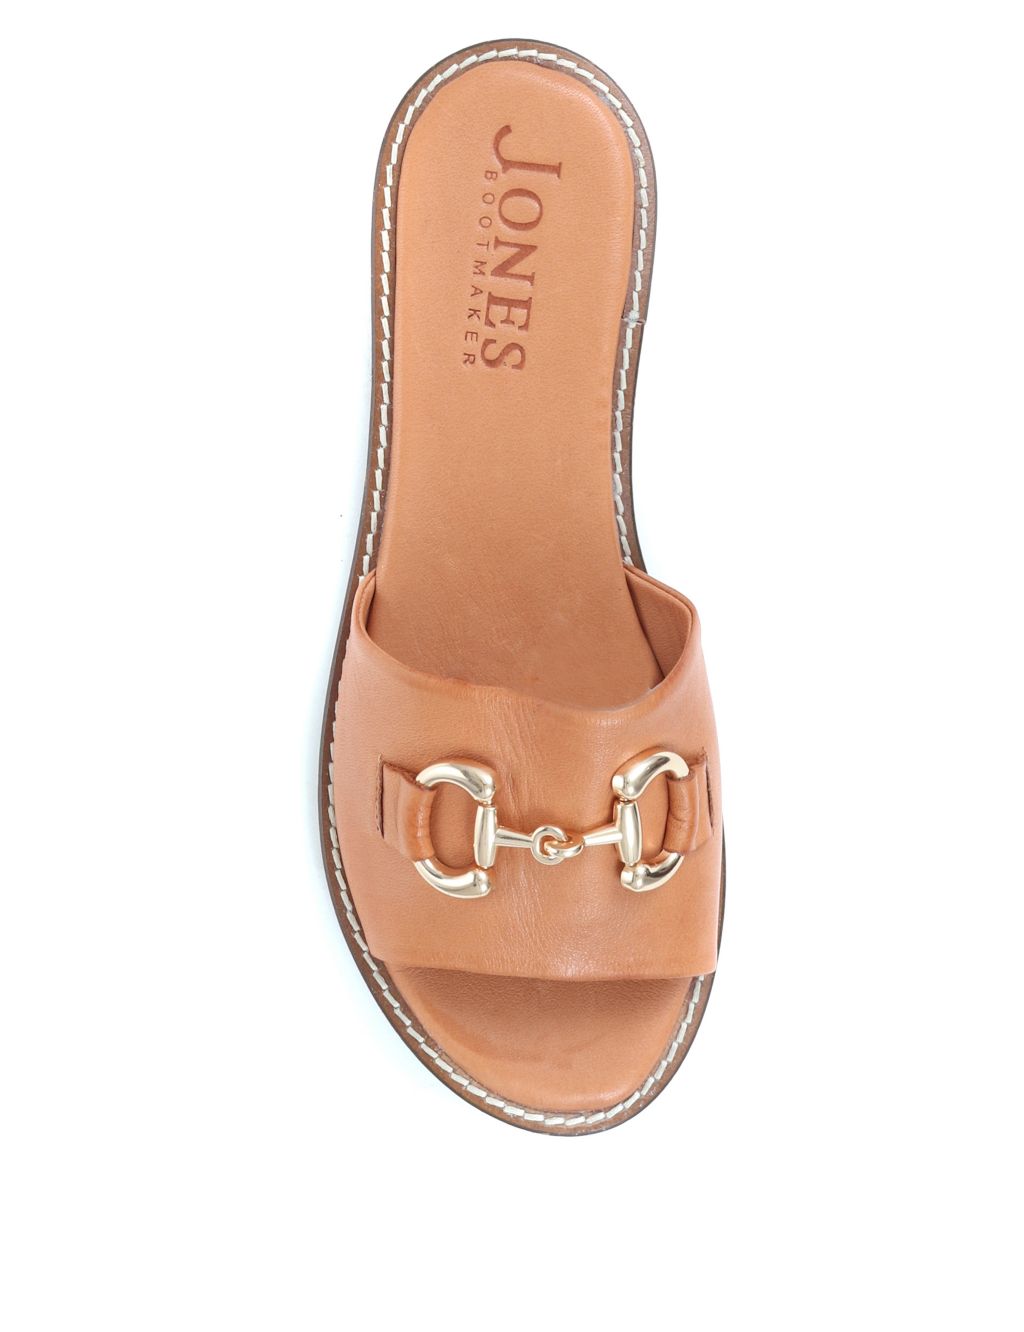 Leather Ring Detail Flat Mules image 6